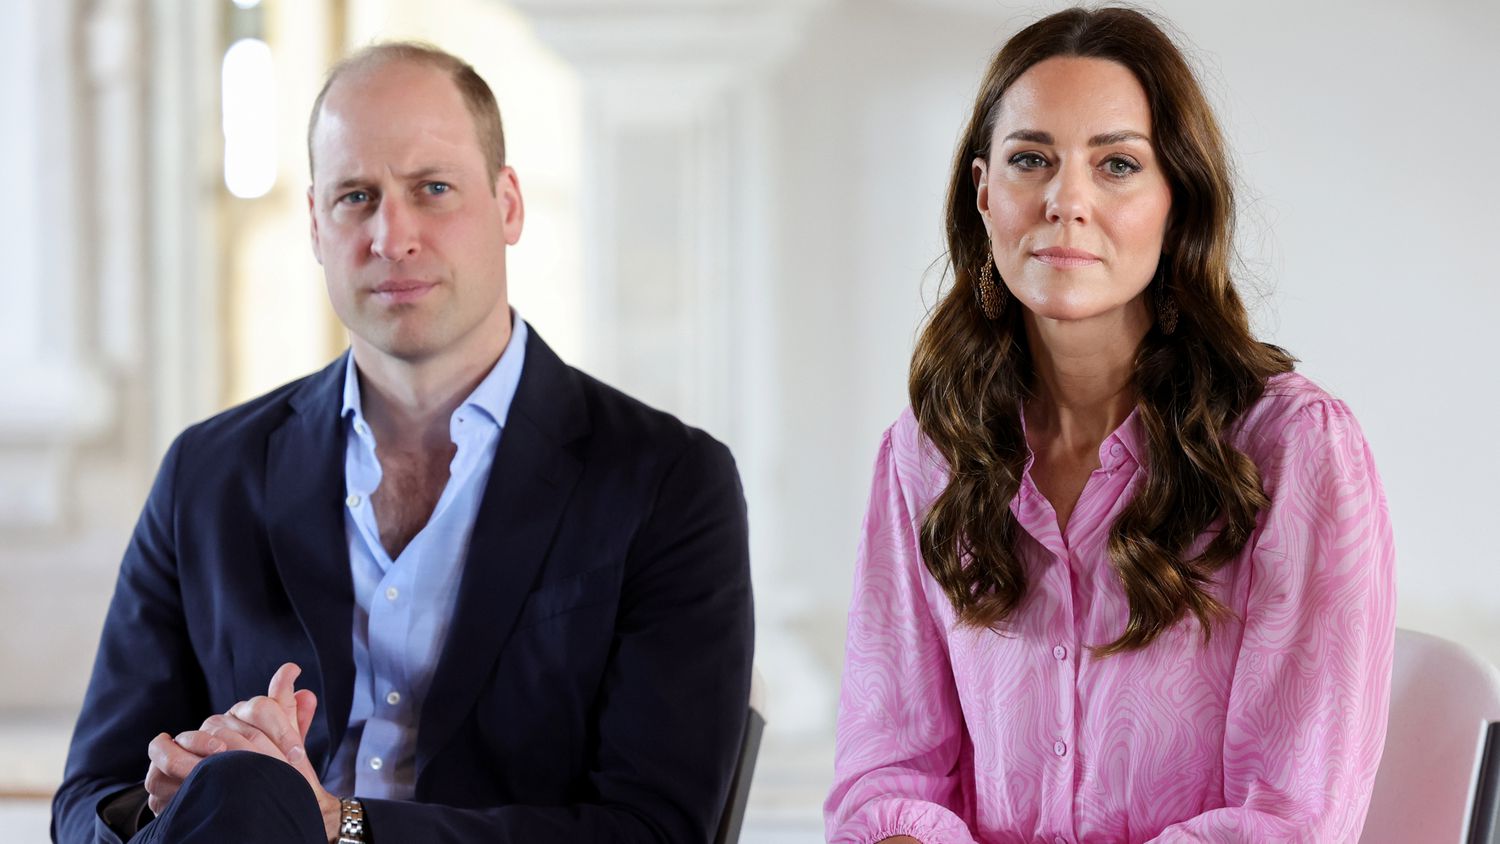 Kate Middleton Takes Break from Royal Duties After Cancer Diagnosis